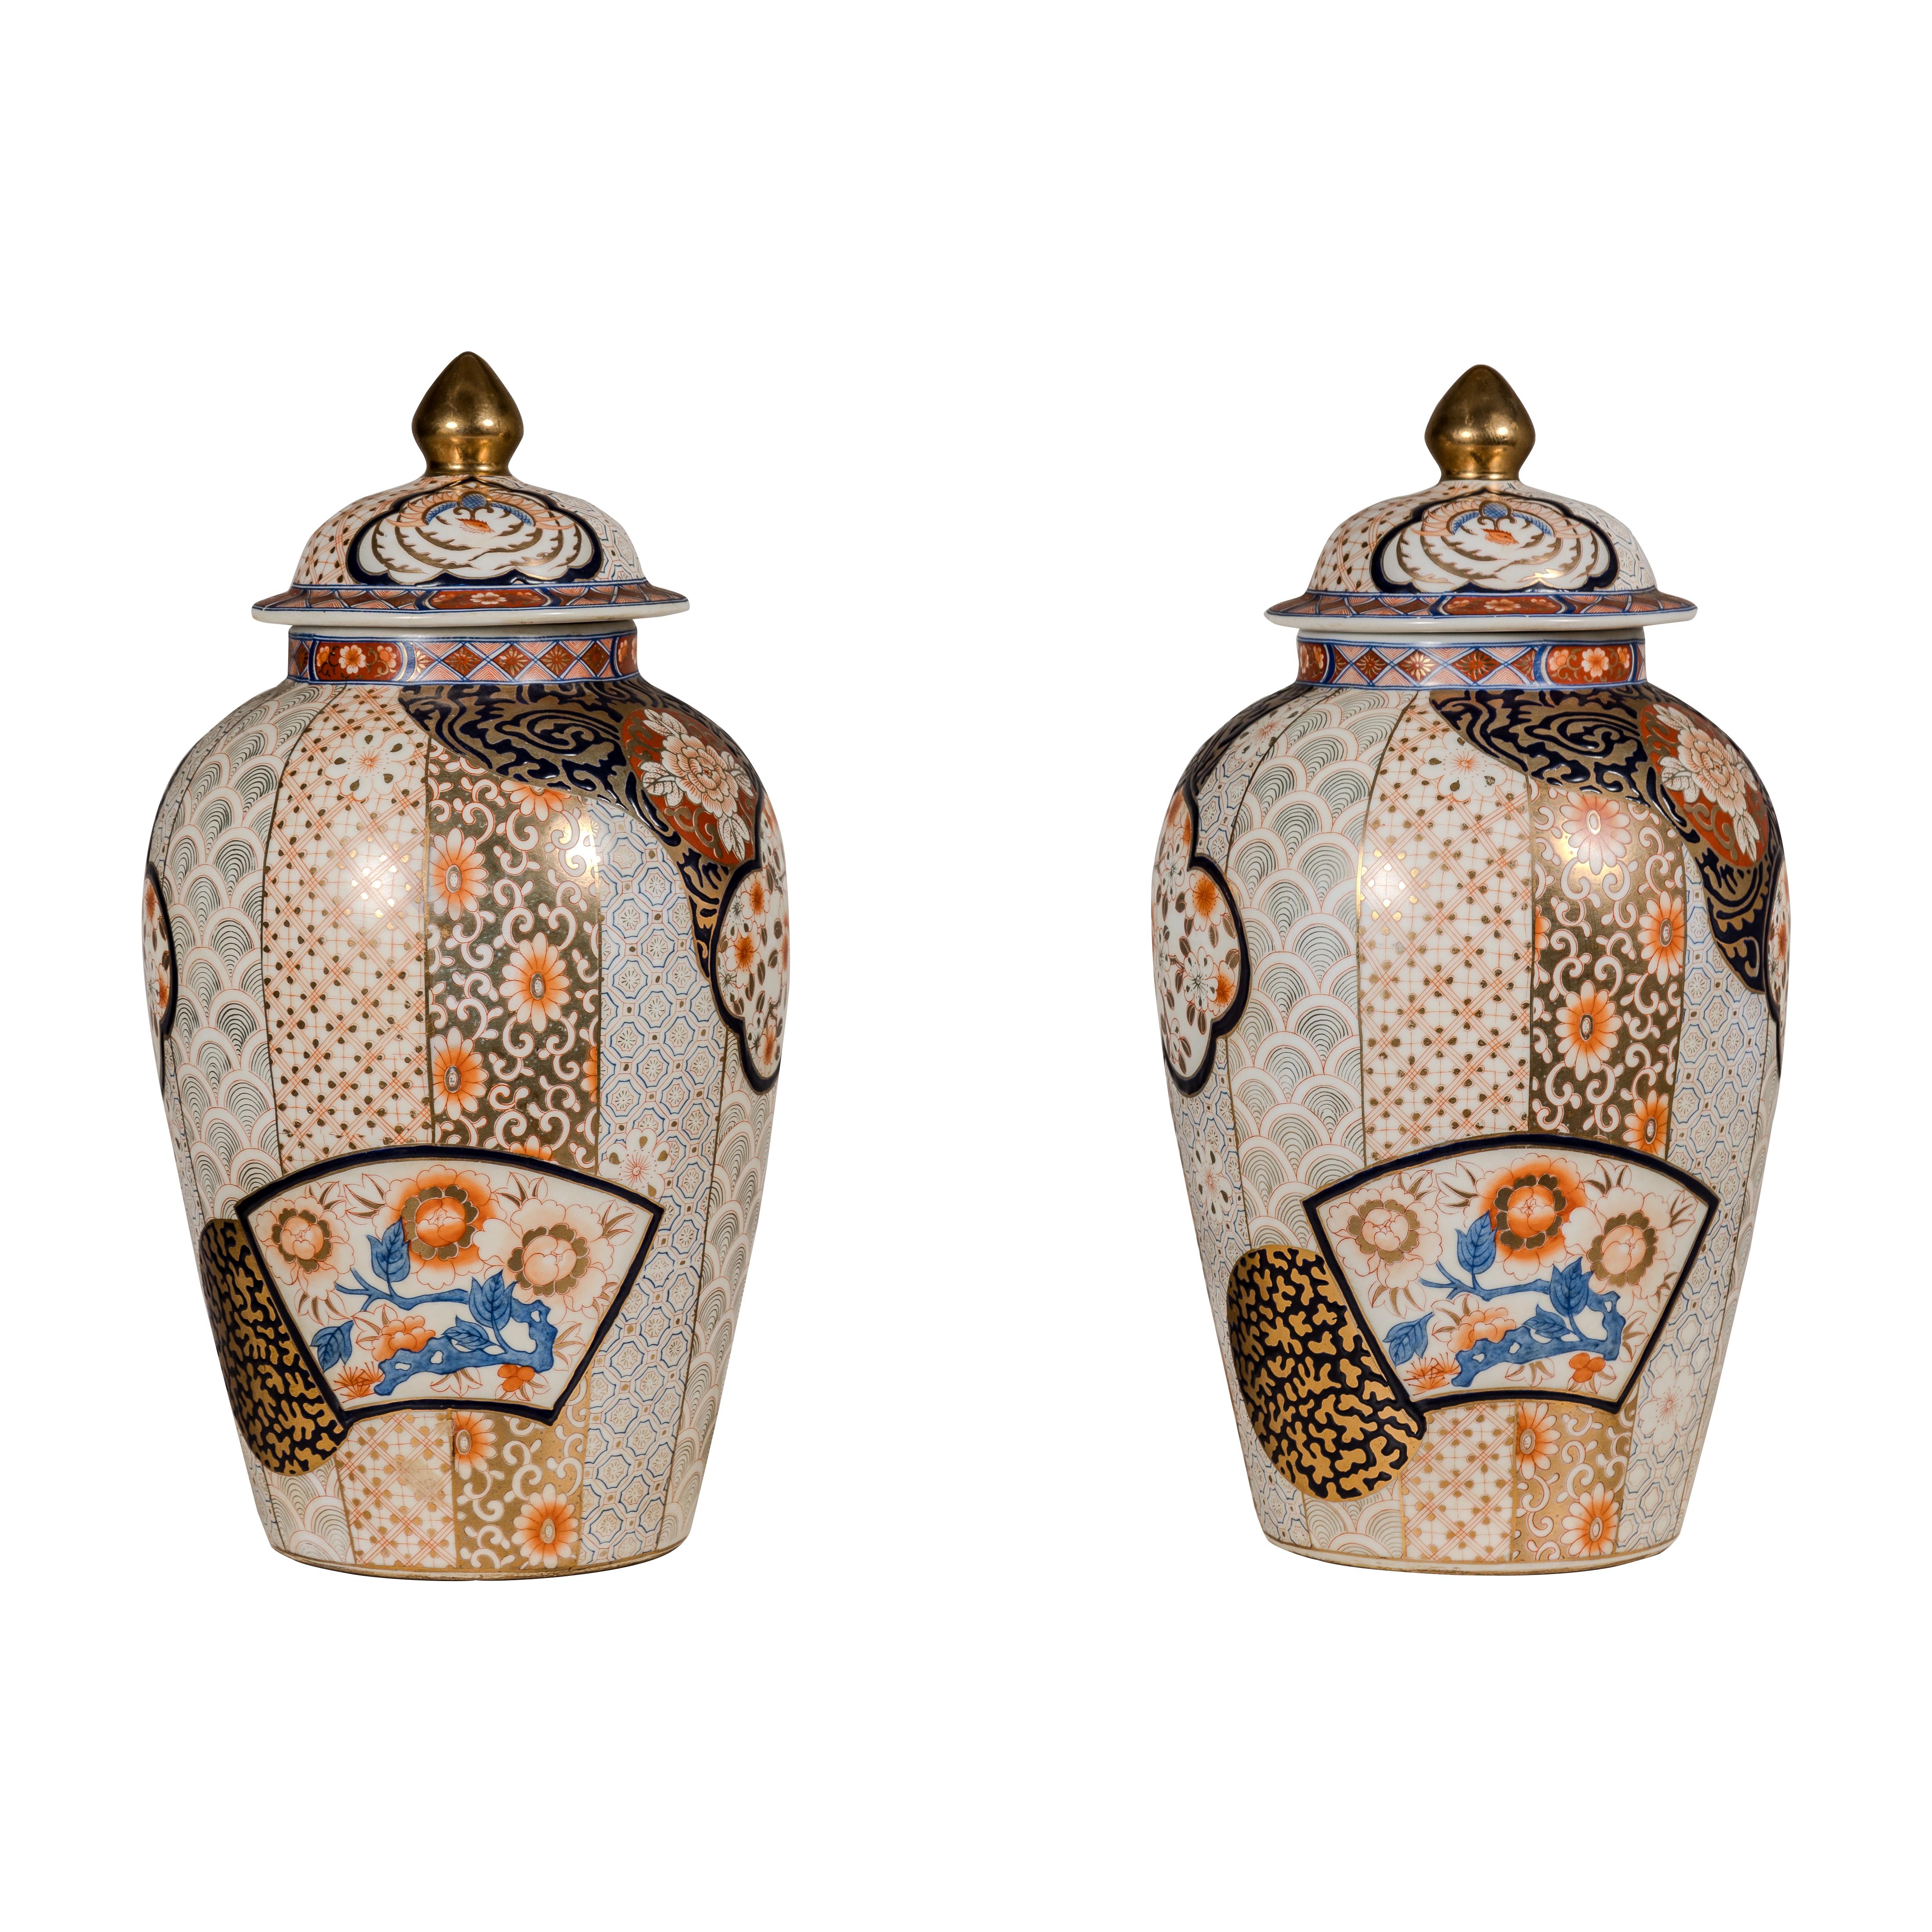 A pair of vintage Arita Japanese style lidded jars with gold, blue and orange floral motifs. This pair of vintage Arita Japanese style lidded jars is a splendid example of the fine craftsmanship and aesthetic beauty characteristic of traditional